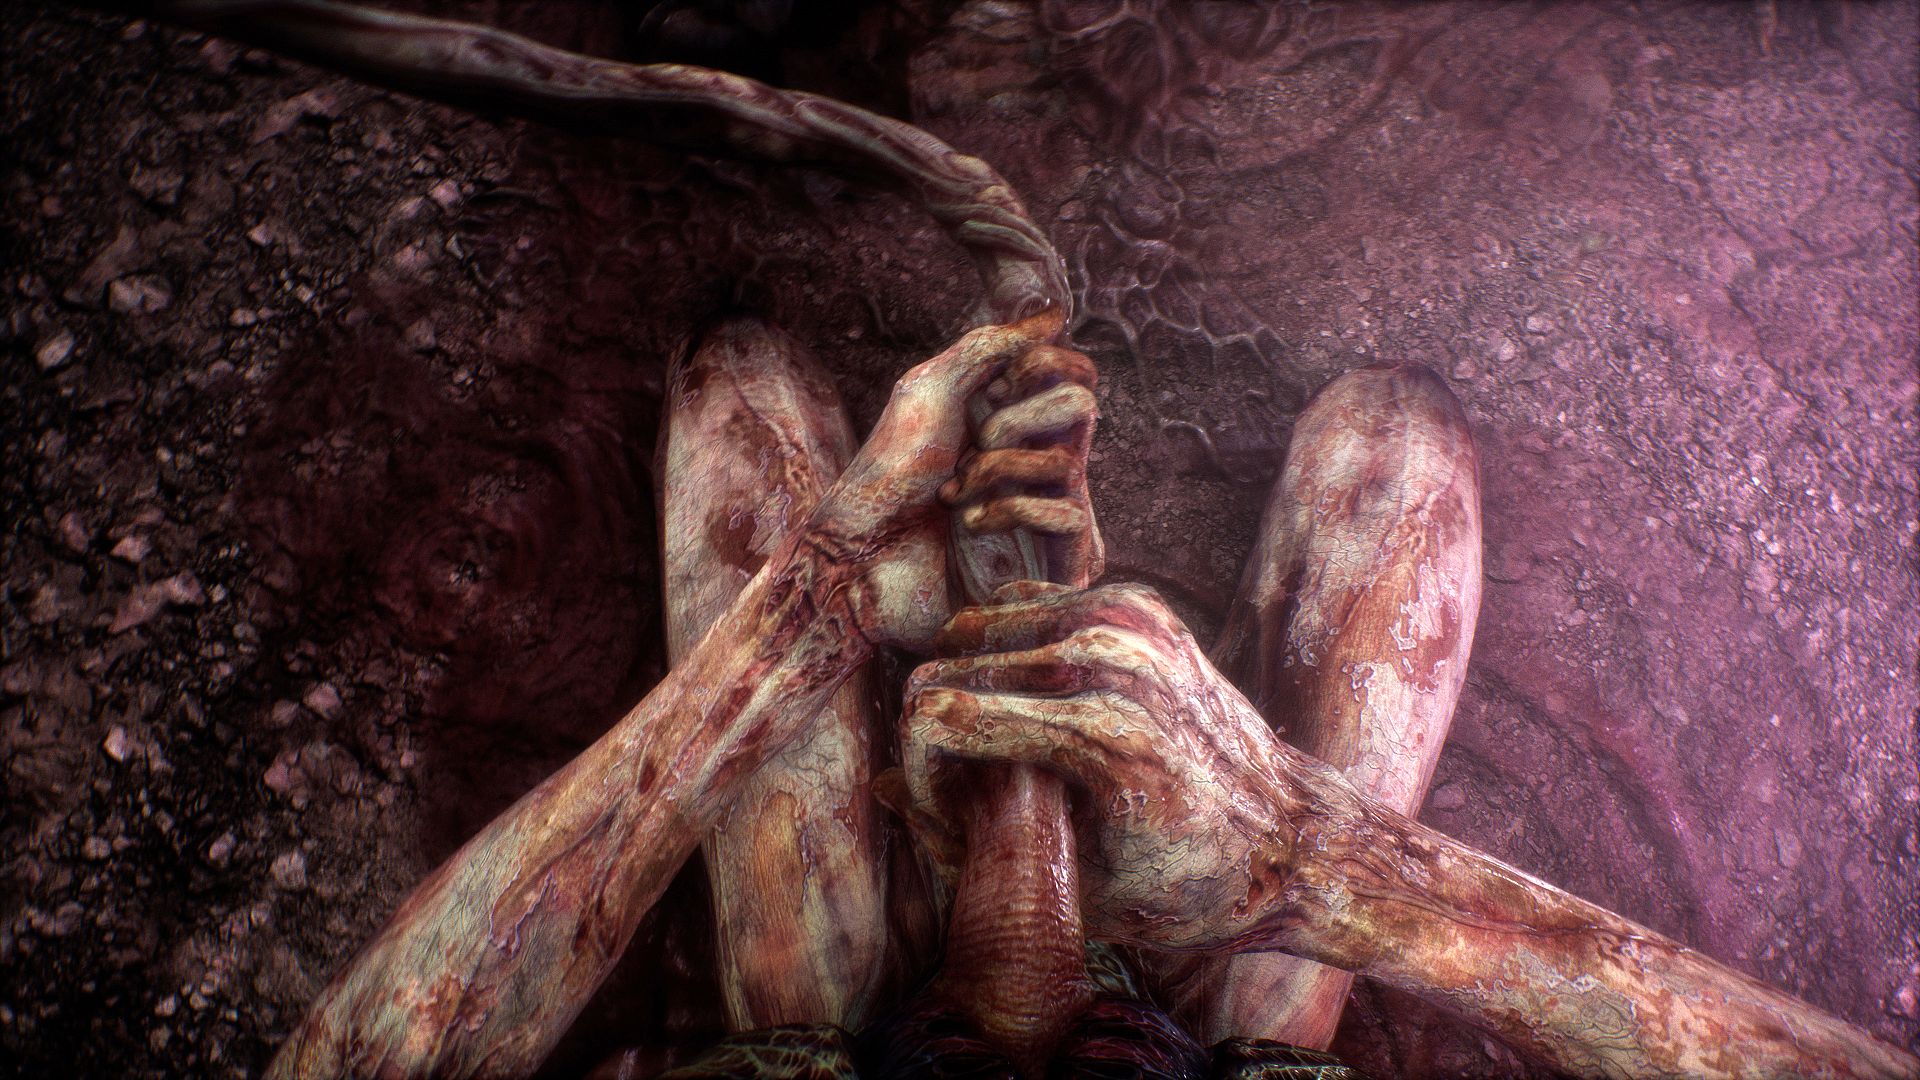 Scorn might be a great alien game: a fleshy humanoid pulling an umbilical cord out of their stomach